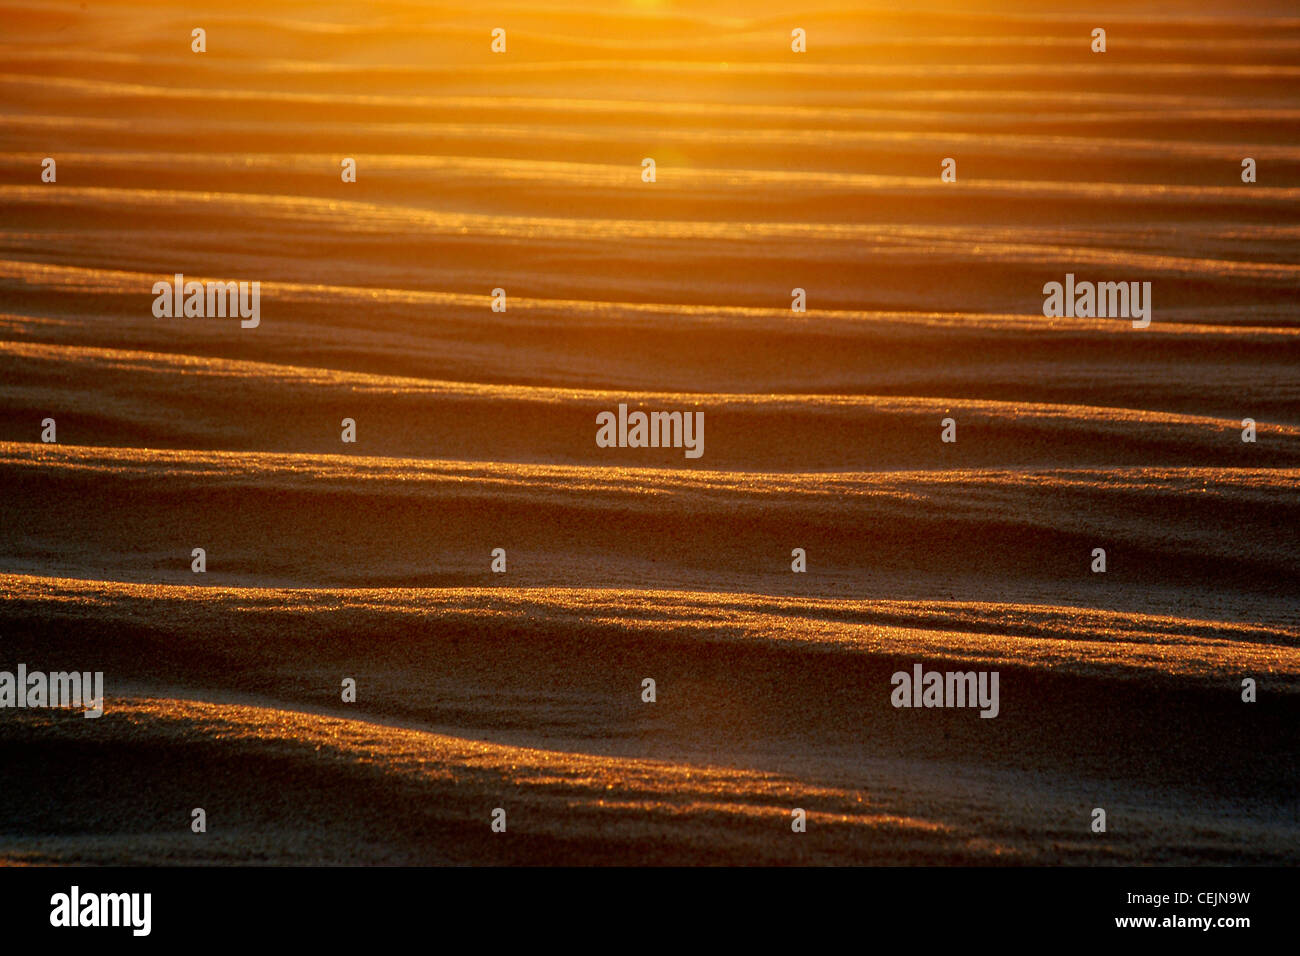 Waves of sand  glowing in the light of the setting sun, like the surface of the sea. Stock Photo